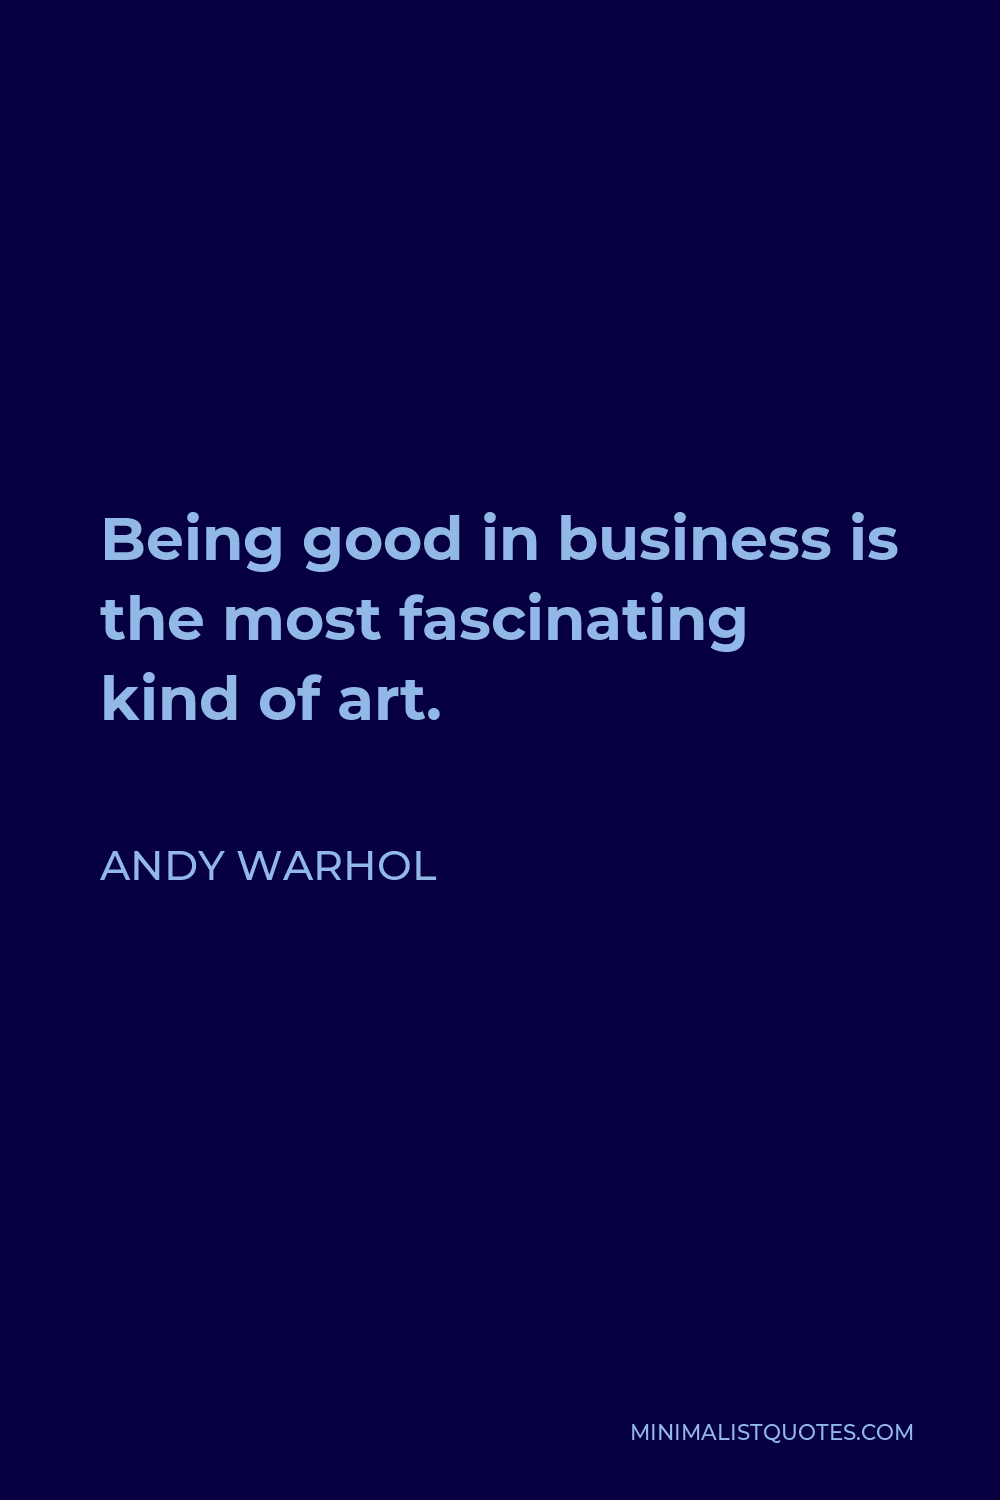 Andy Warhol Quote - Being good in business is the most fascinating kind of art. Making money is art and working is art and good business is the best art.